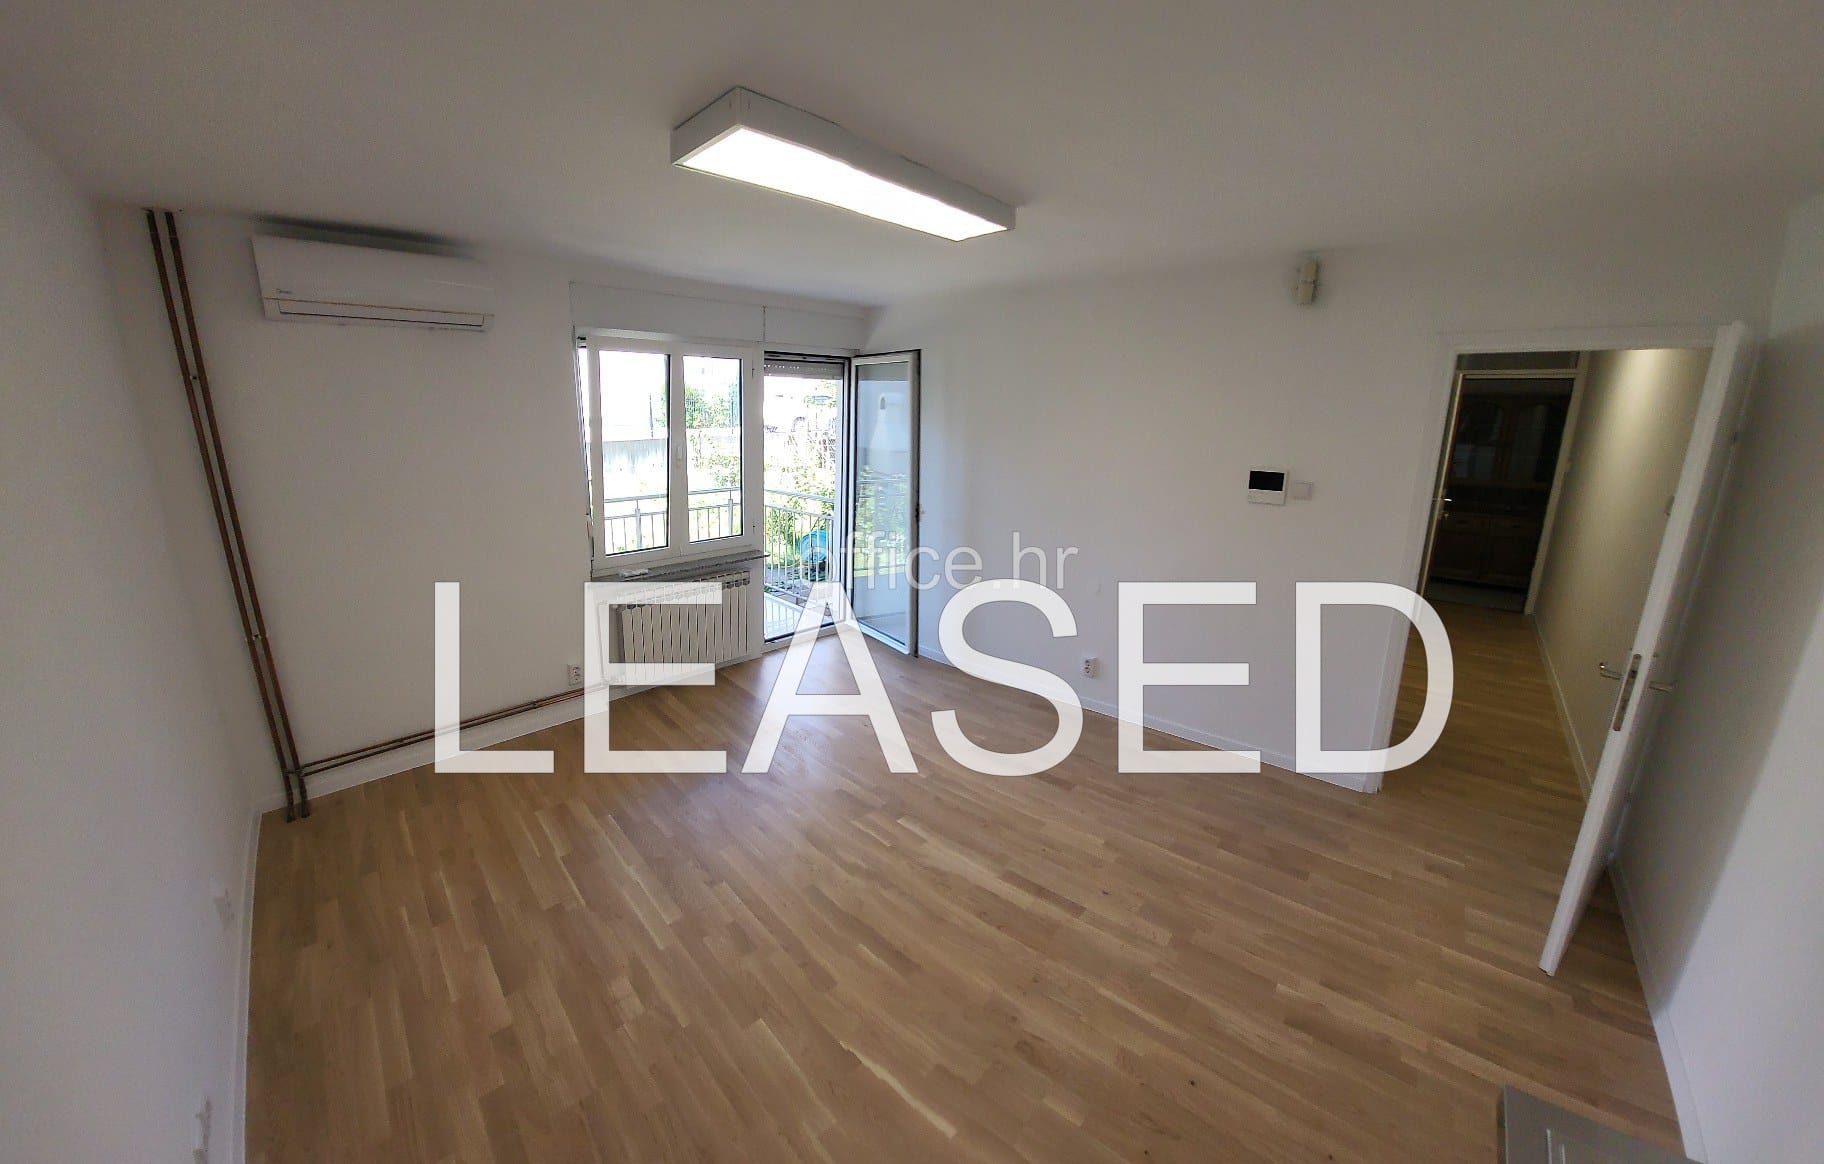 Zagreb South, renovated 2room business space for rent, 34sqm, ground floor